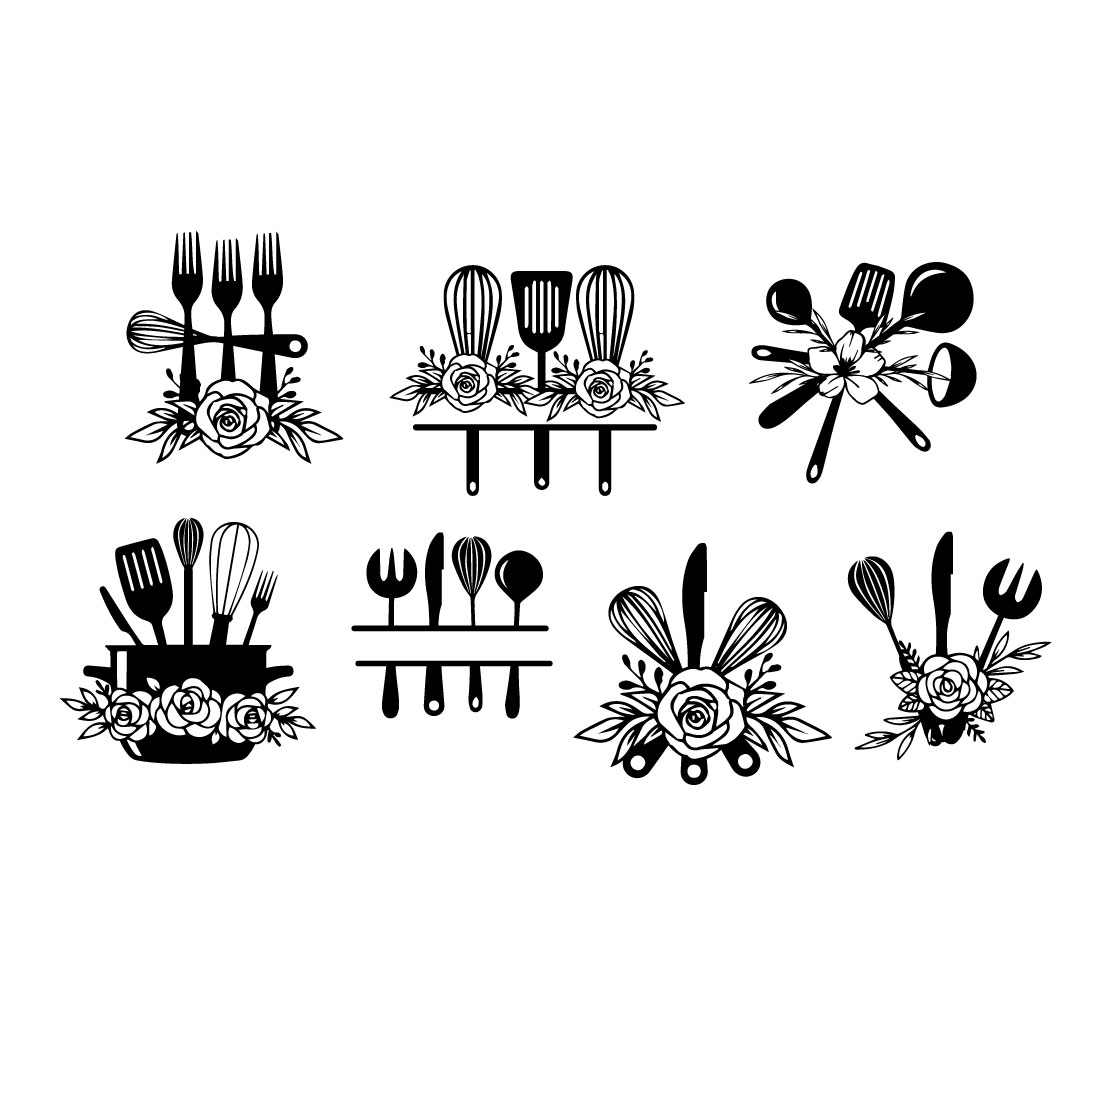 A selection of beautiful black images of kitchen utensils